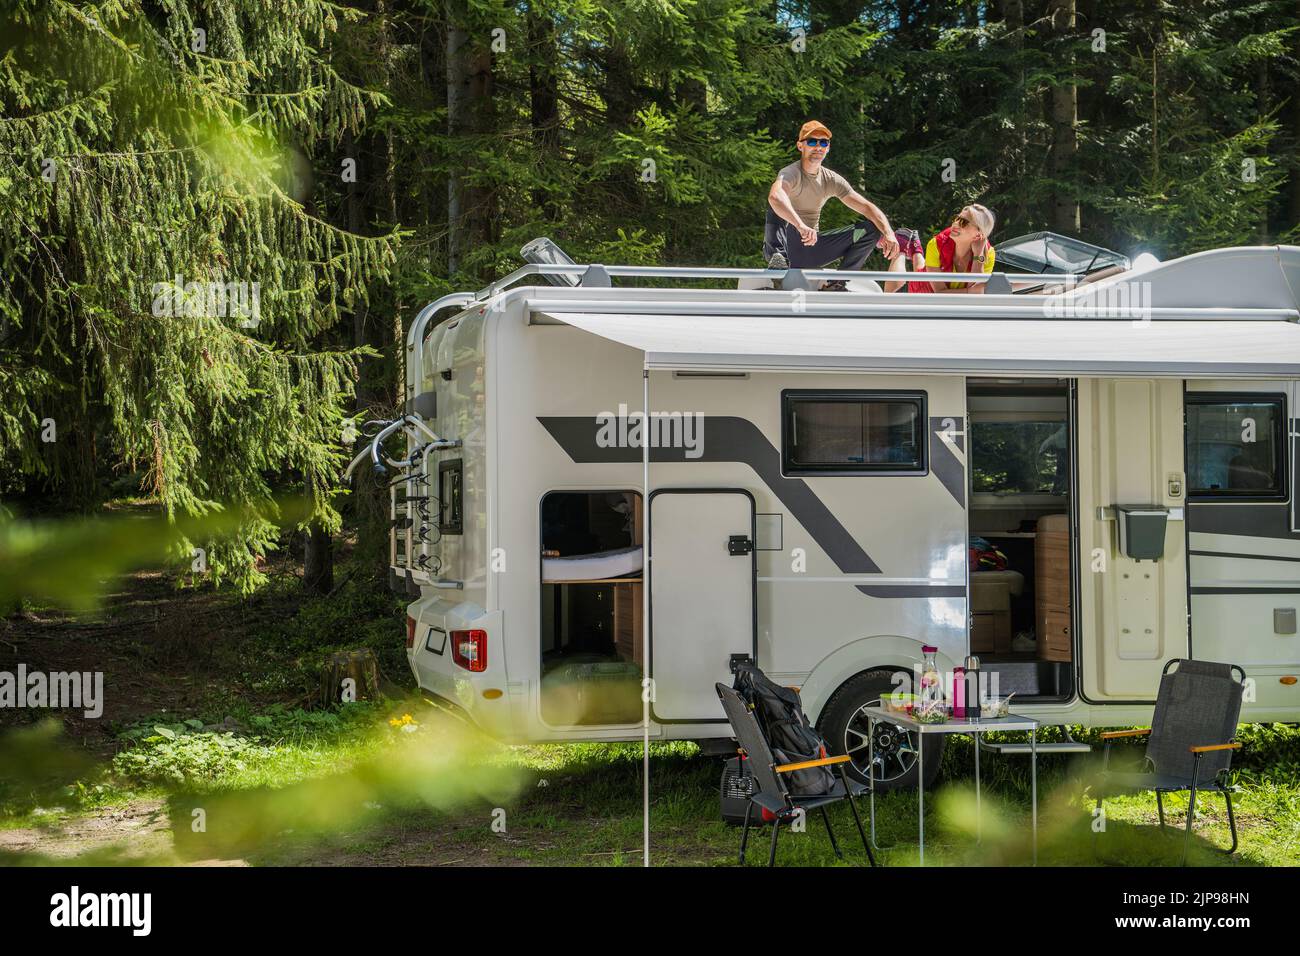 Family of Two, Husband and Wife, Resting on the Roof of Their White Camper Van Parked in the Middle of Scenic Green Forest Enjoying the Moment During Stock Photo